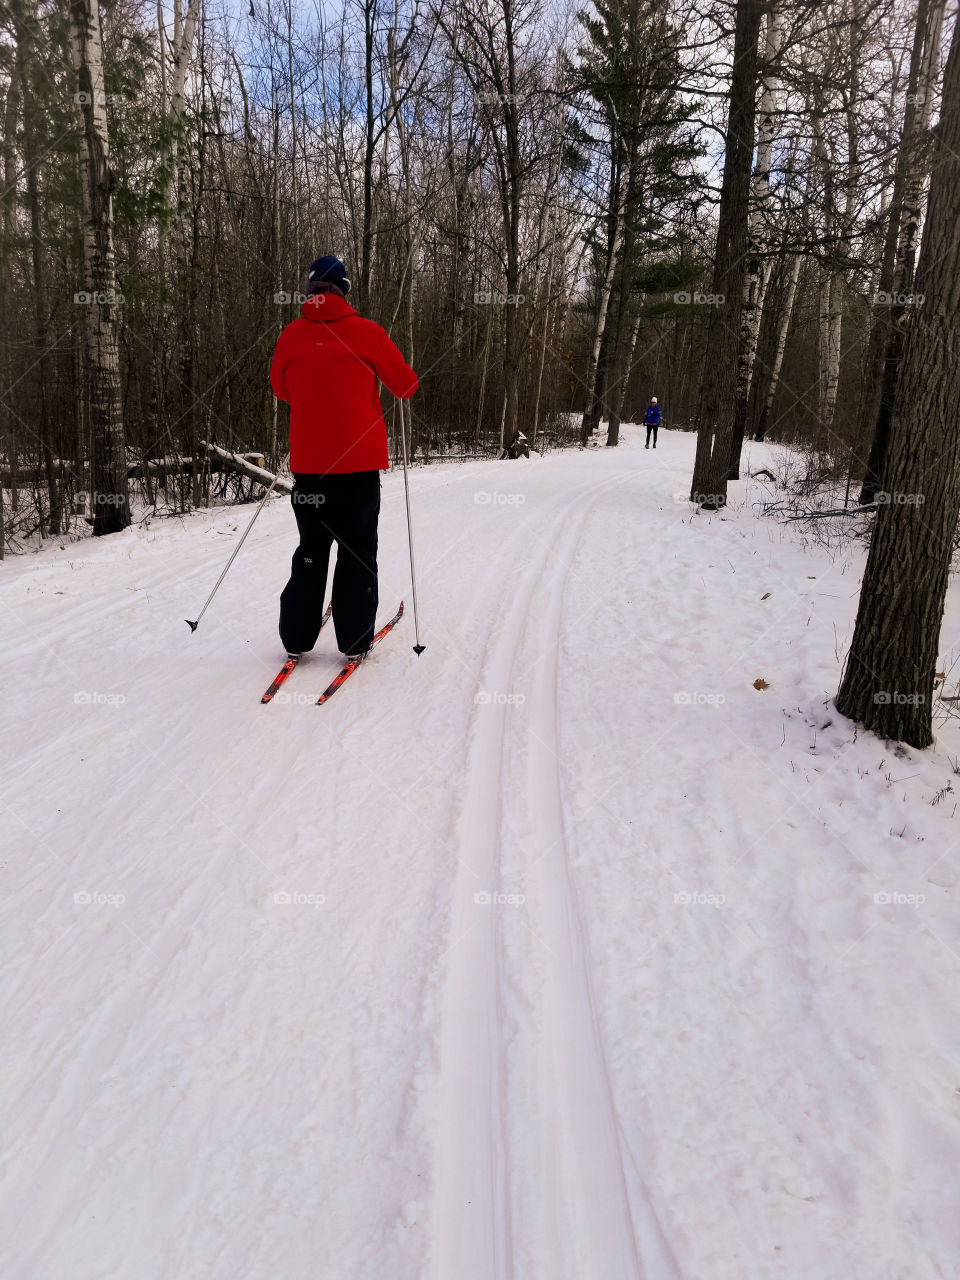 On the move! - Cross country skiing